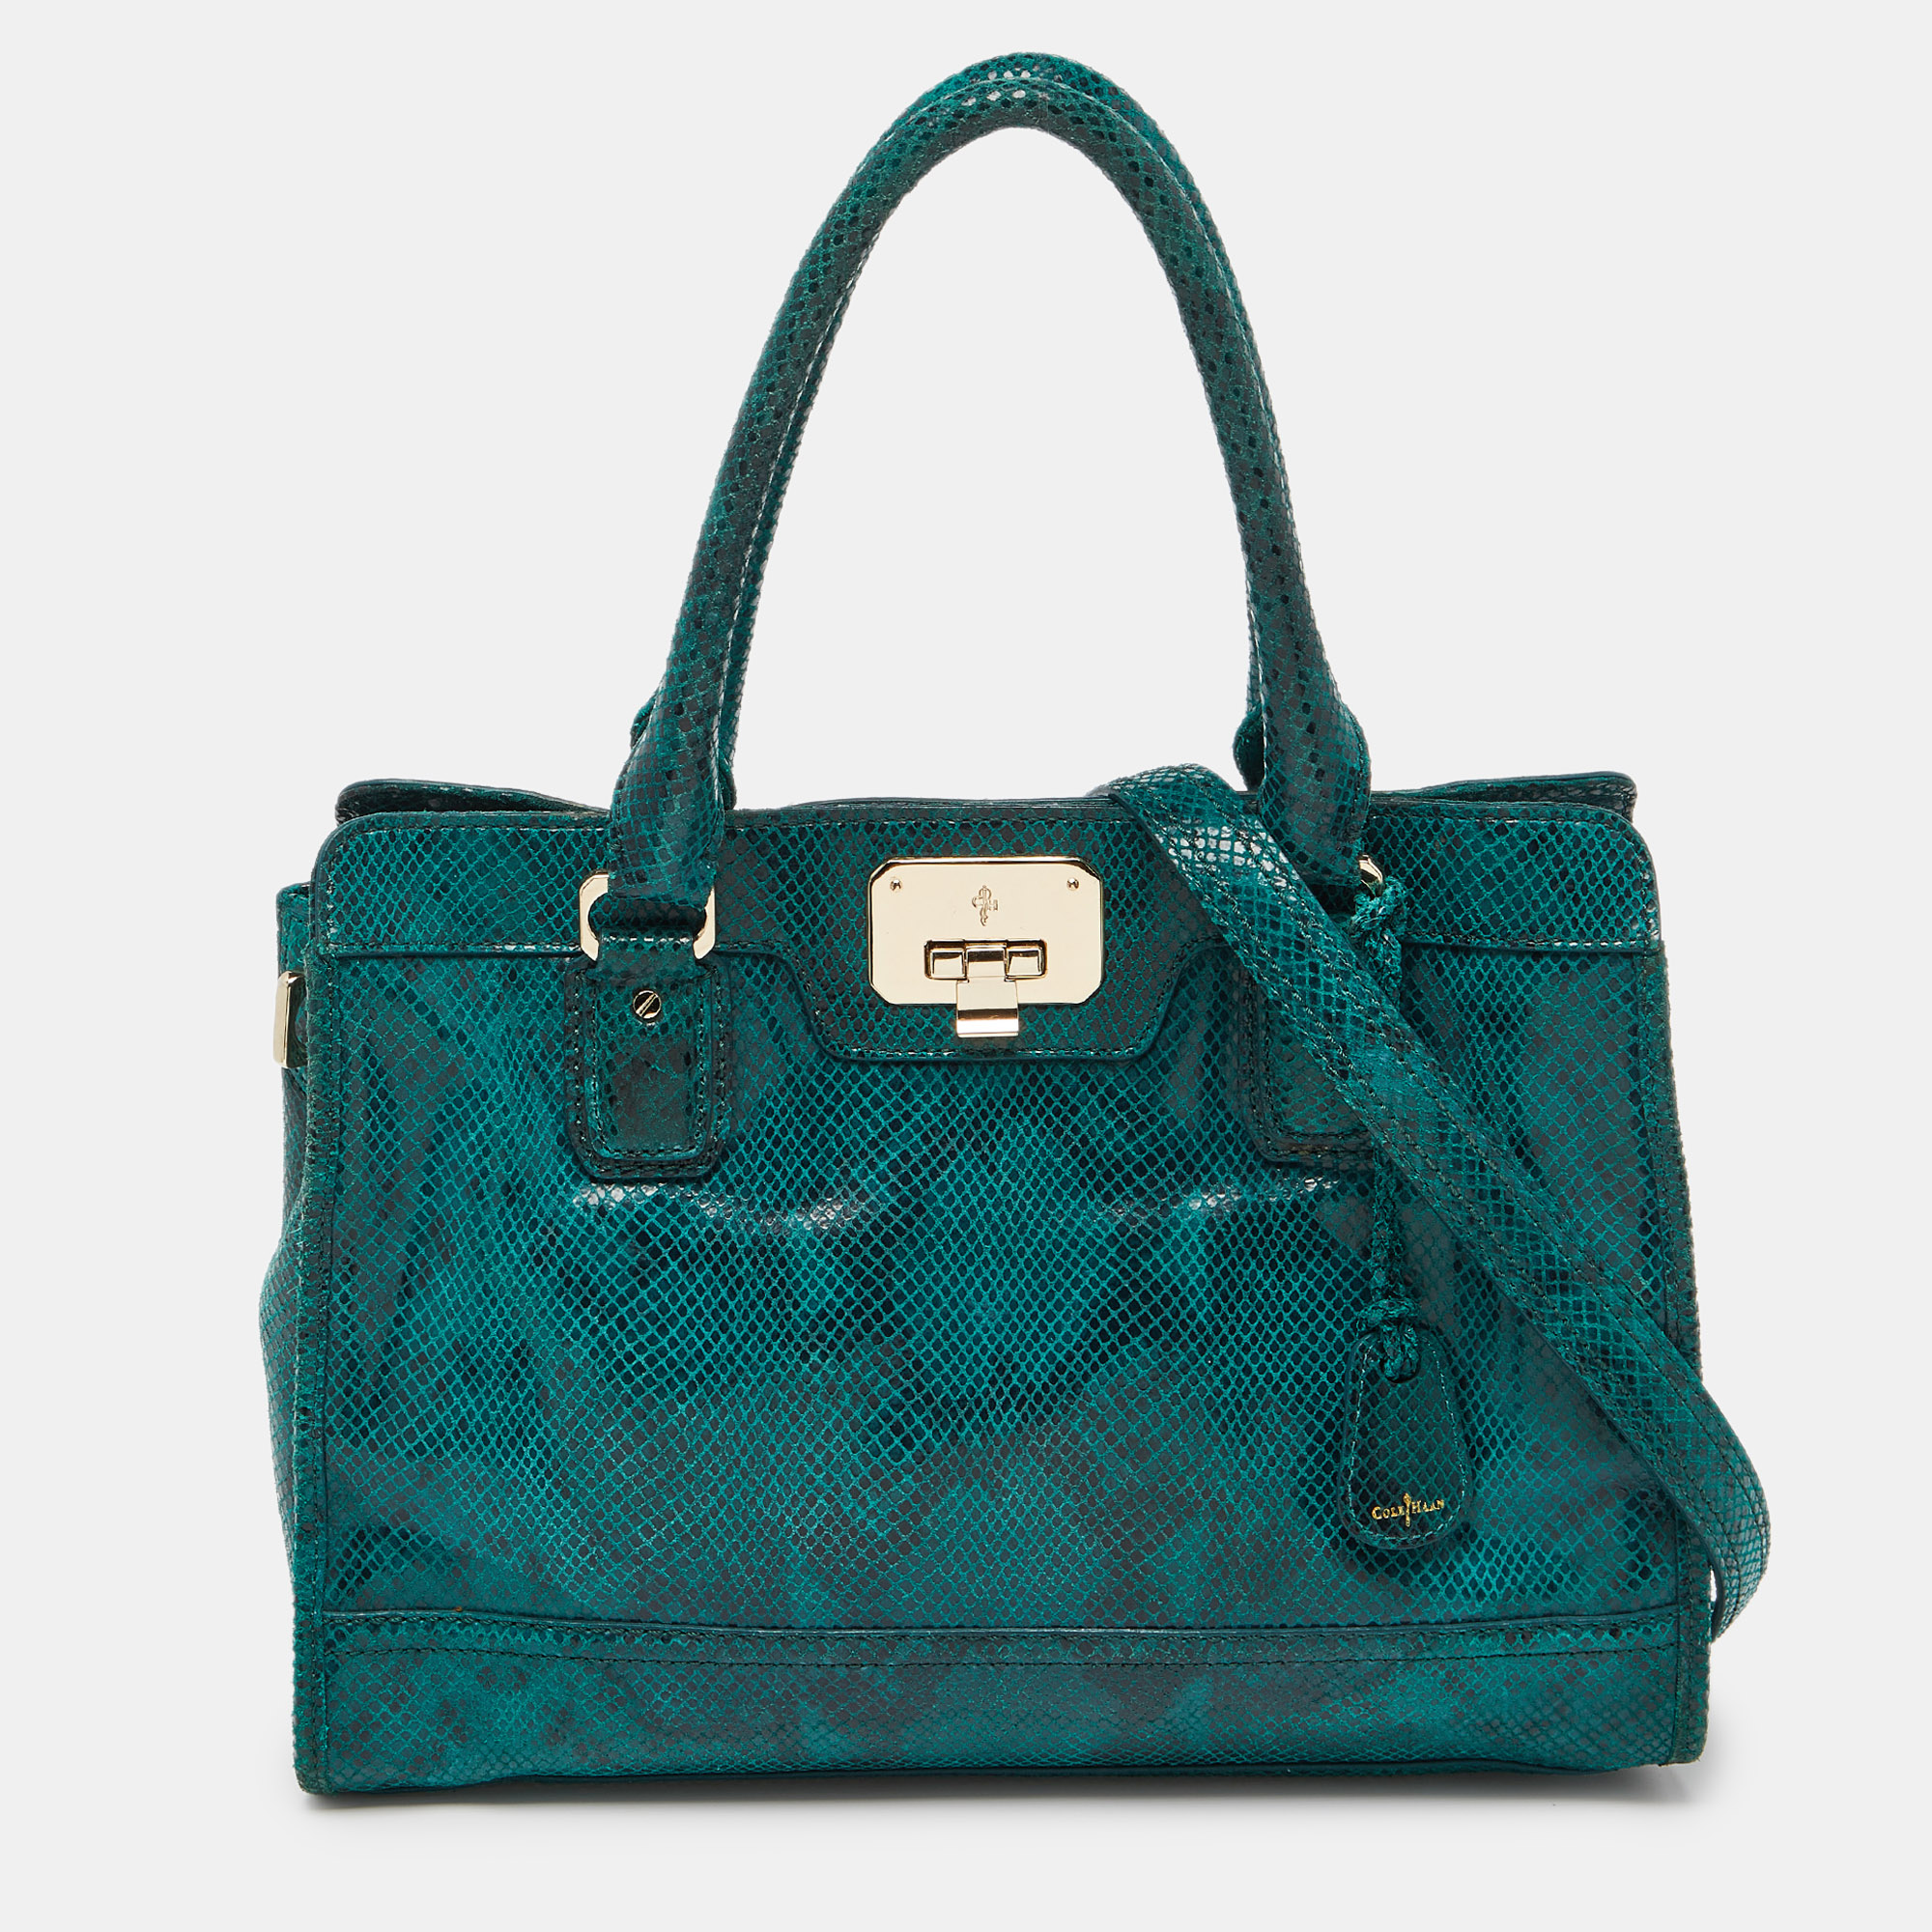 

Cole Haan Green Snakeskin Embossed Leather Tote